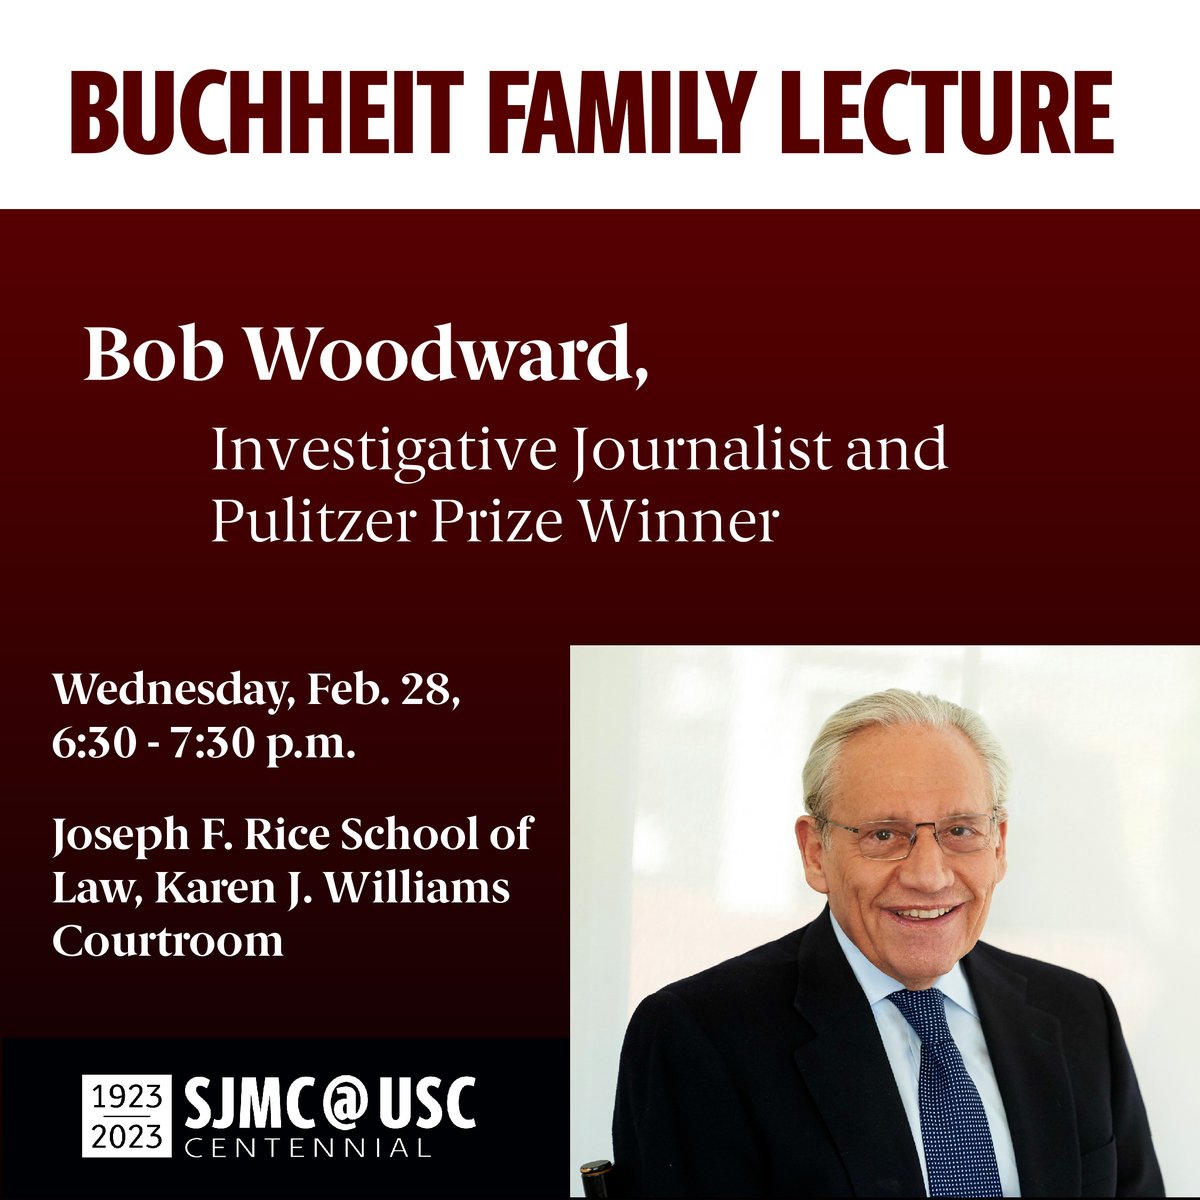 This year's Buchheit Family Lecture will feature investigative journalist and Pulitzer Prize winner Bob Woodward. Date and Time: Wednesday, Feb. 28, 6:30-7:30 p.m. Location: Joseph F. Rice School of Law, Karen J. Williams Courtroom Registration: bit.ly/buchheit-lectu…